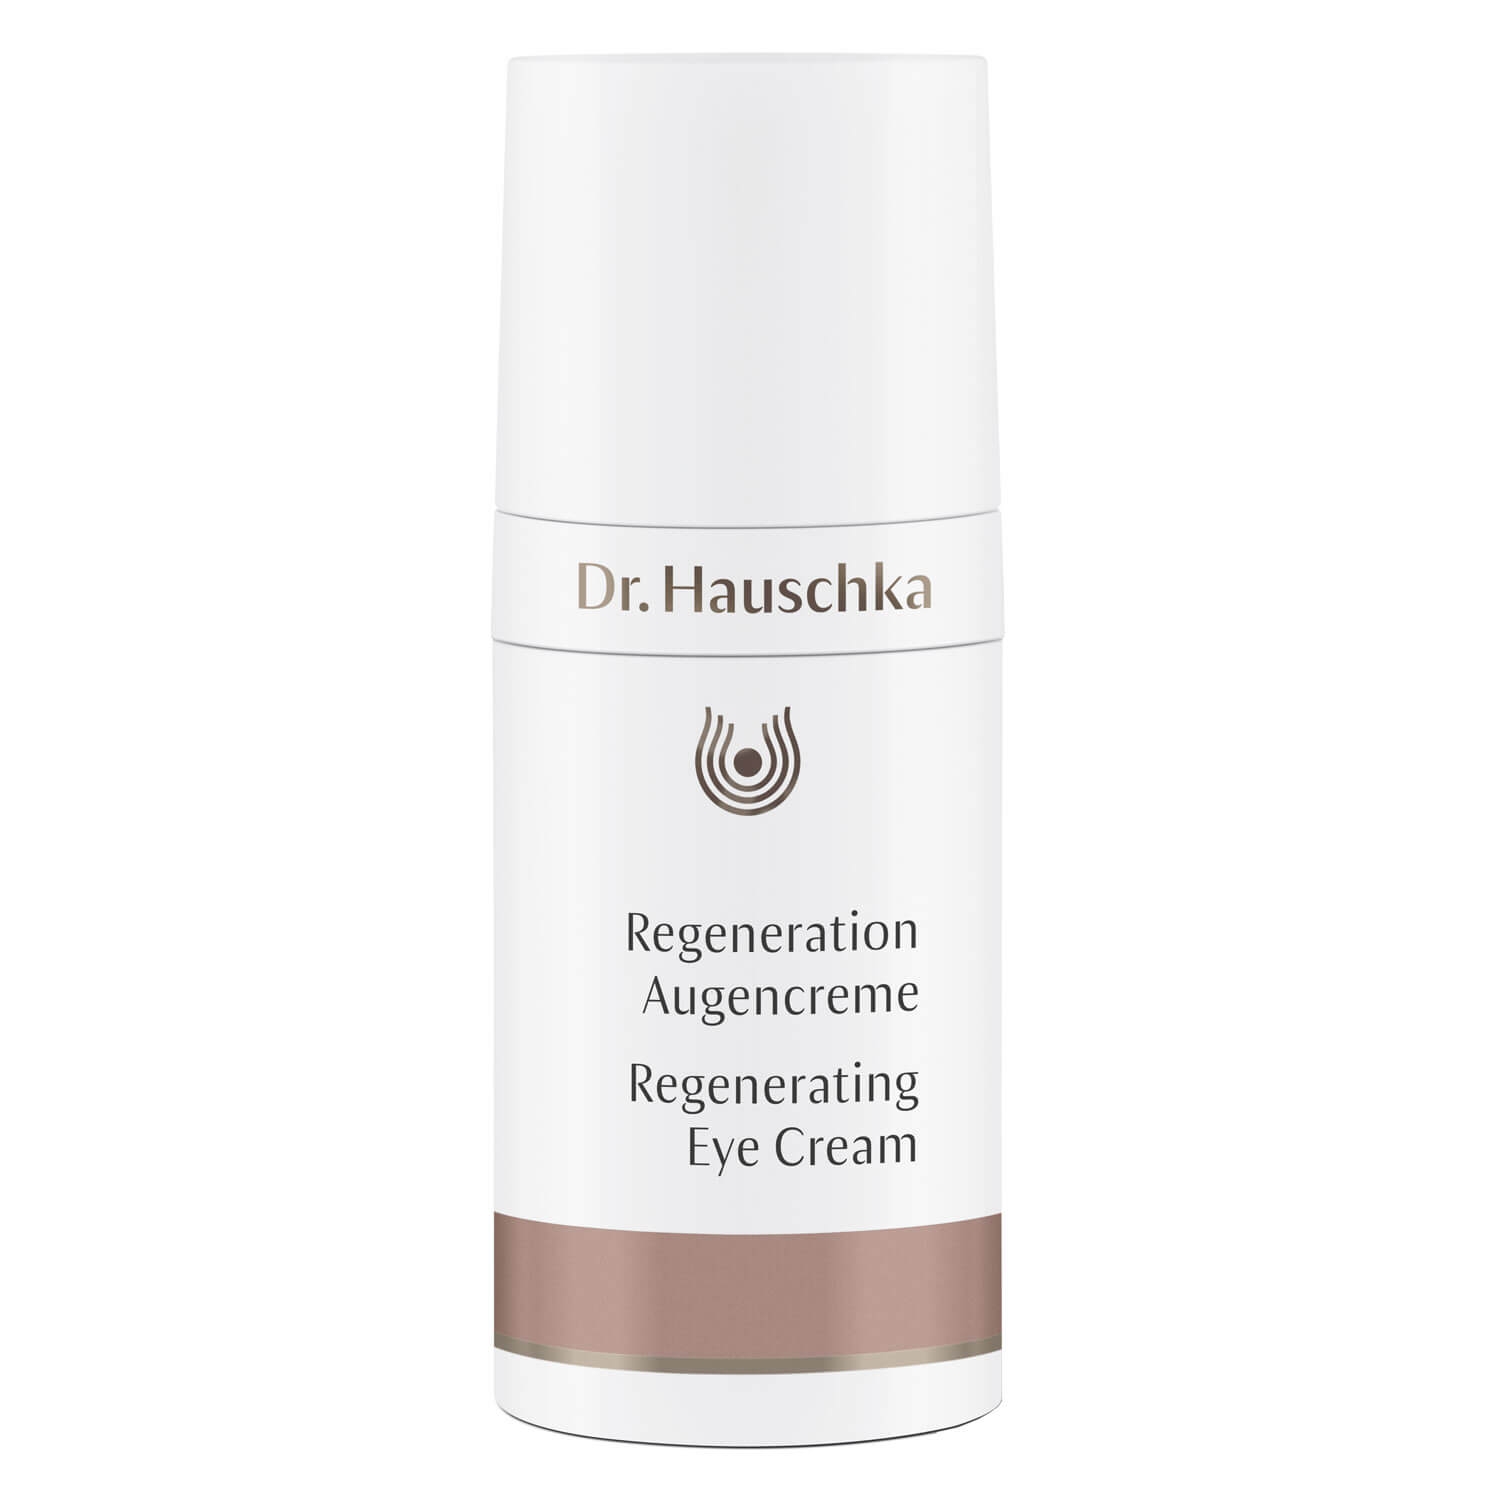 Product image from Dr. Hauschka - Regenerations Augencreme